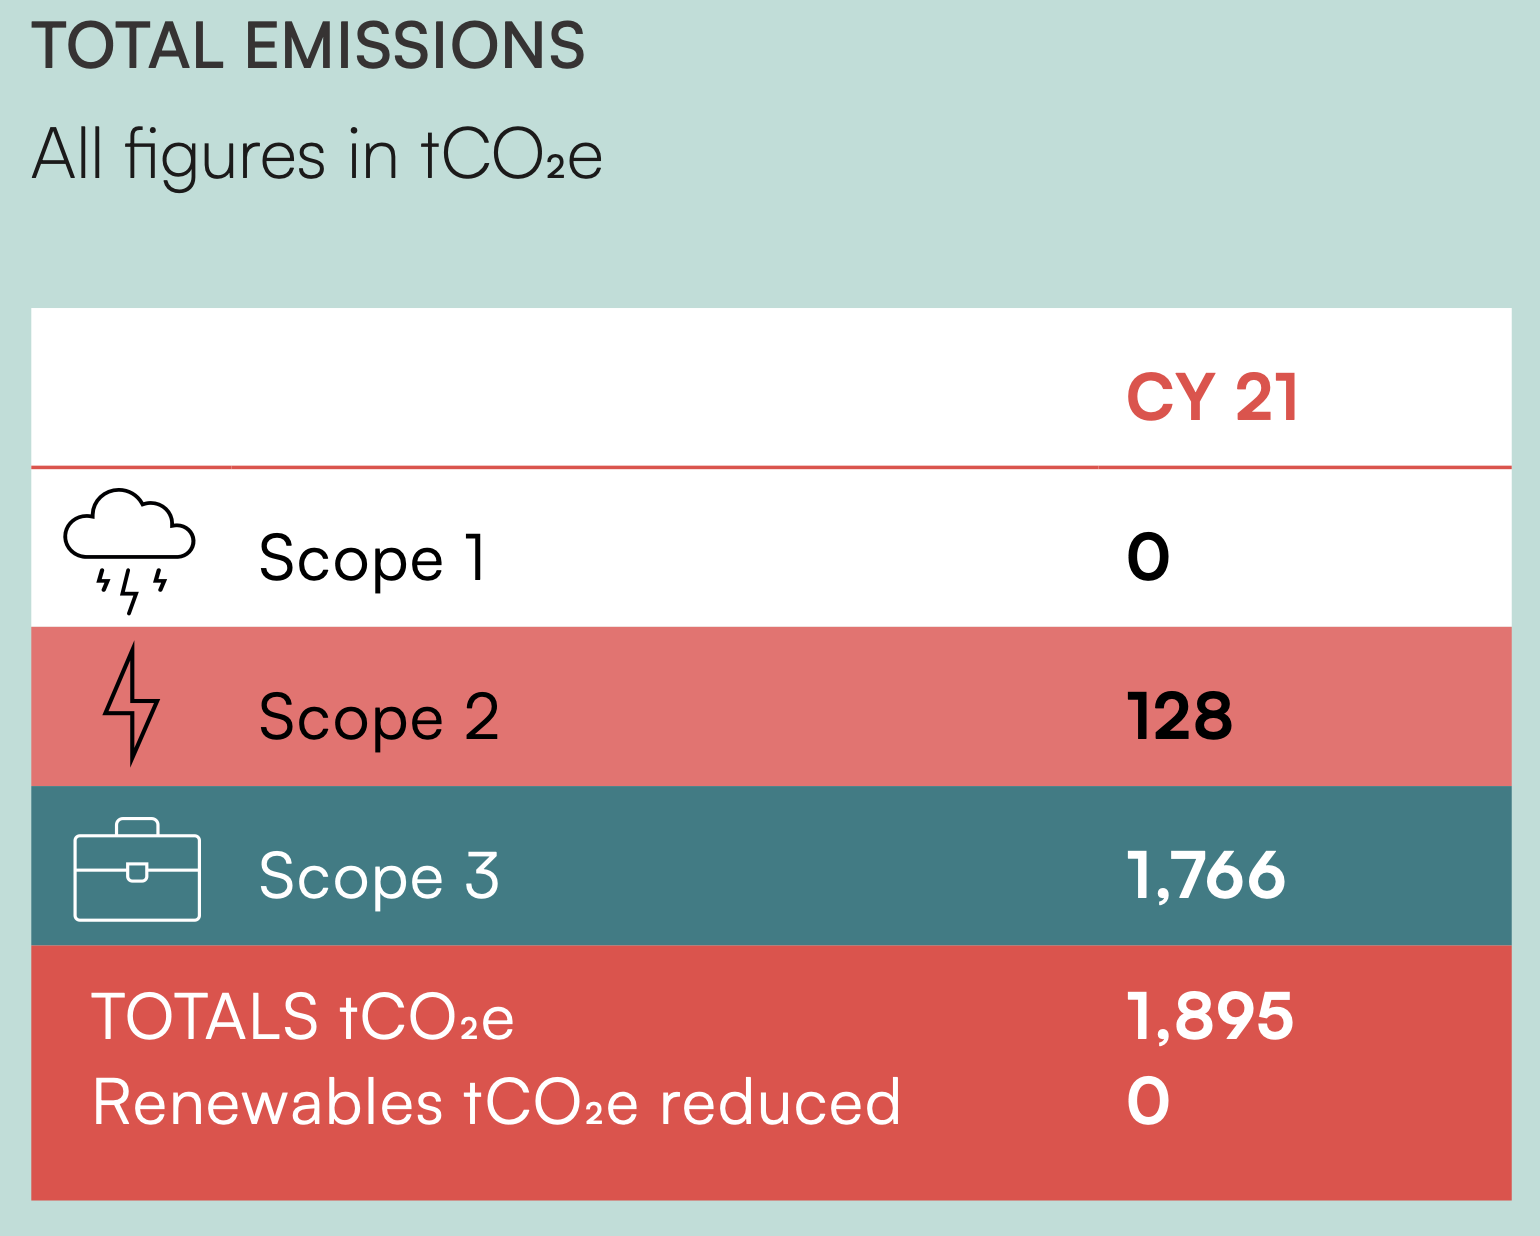 A chart showing total emissions including Scope 1, Scope 2, and Scope 3 emissions.